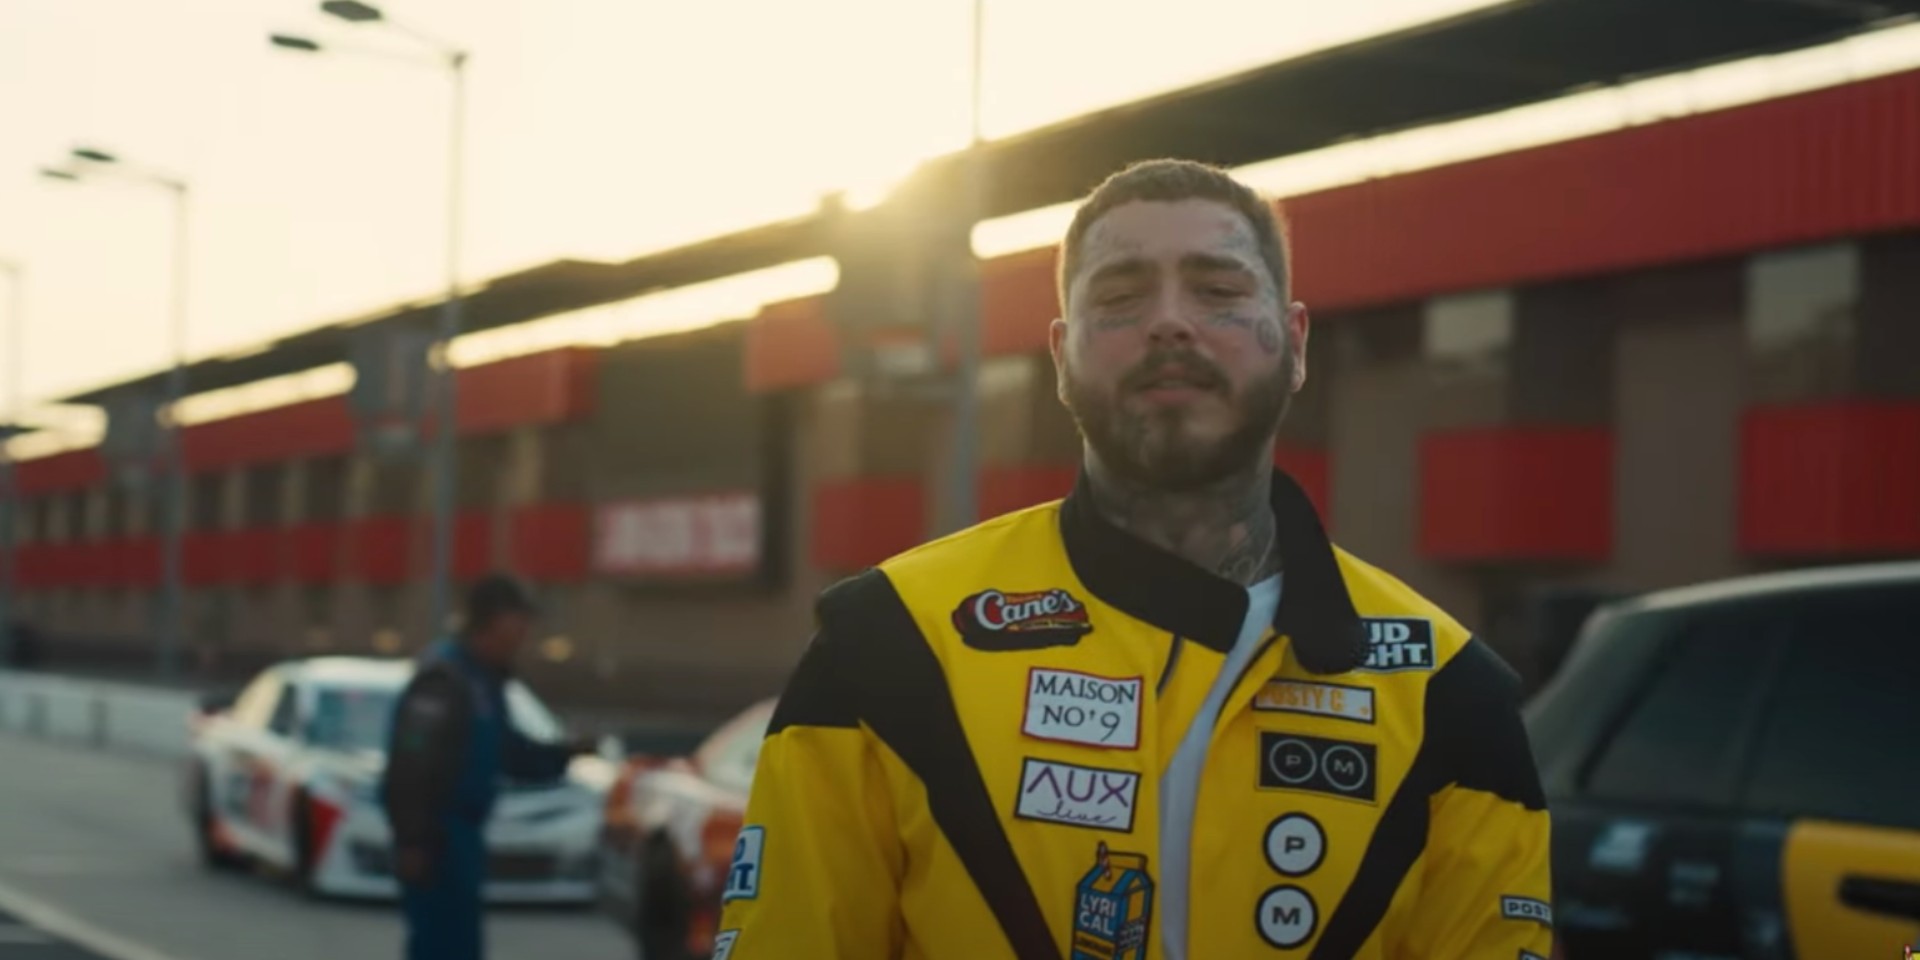 Post Malone teams up with NASCAR for new music video of ‘Motley Crew’ – watch